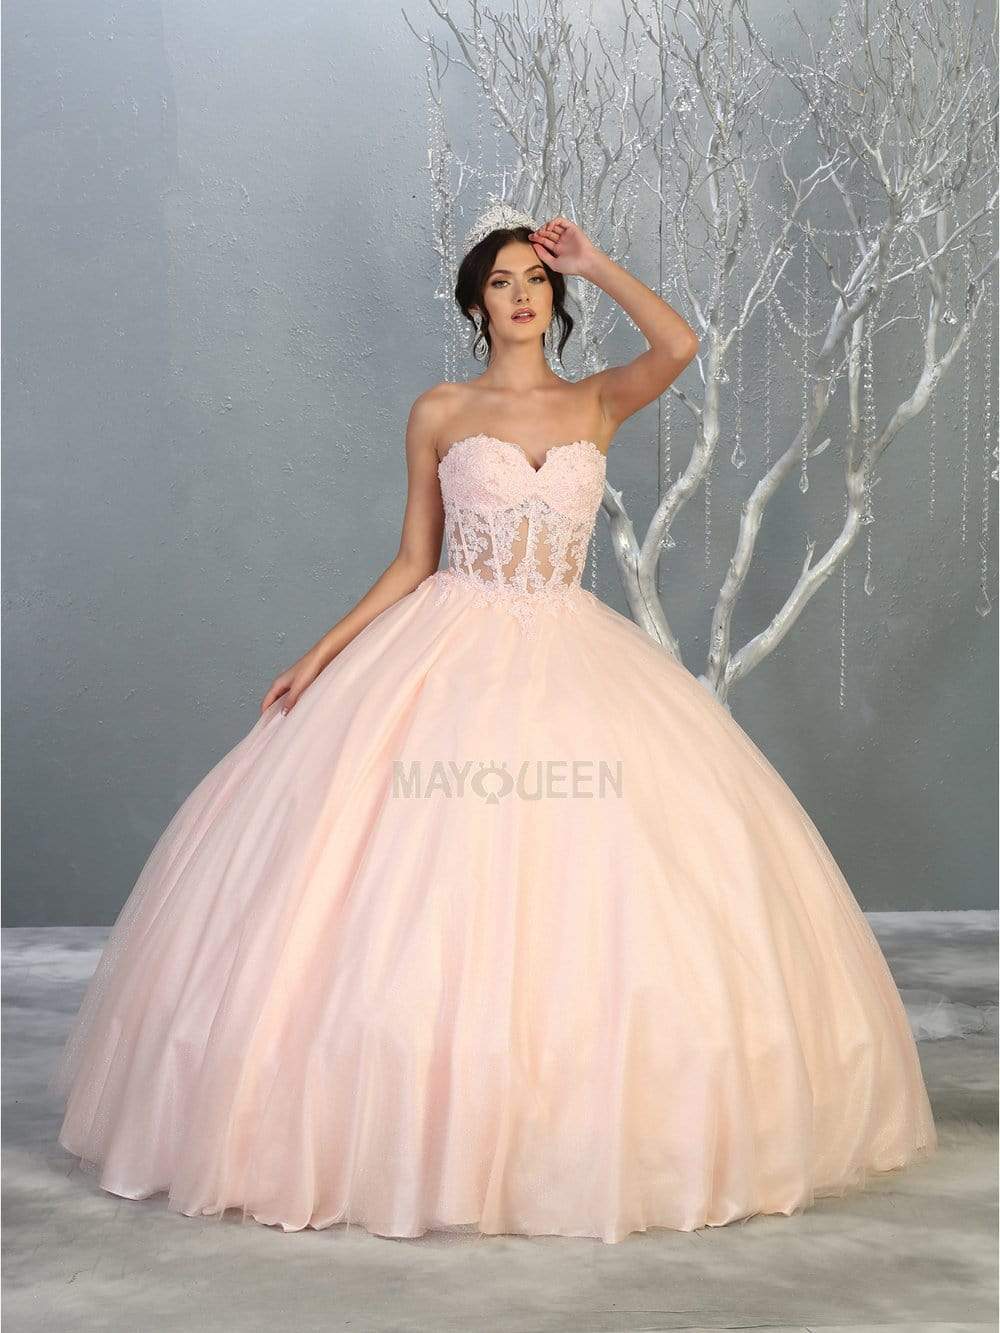 May Queen - LK141 Strapless Sweetheart Corset Bodice Ballgown Quinceanera Dresses 4 / Blush